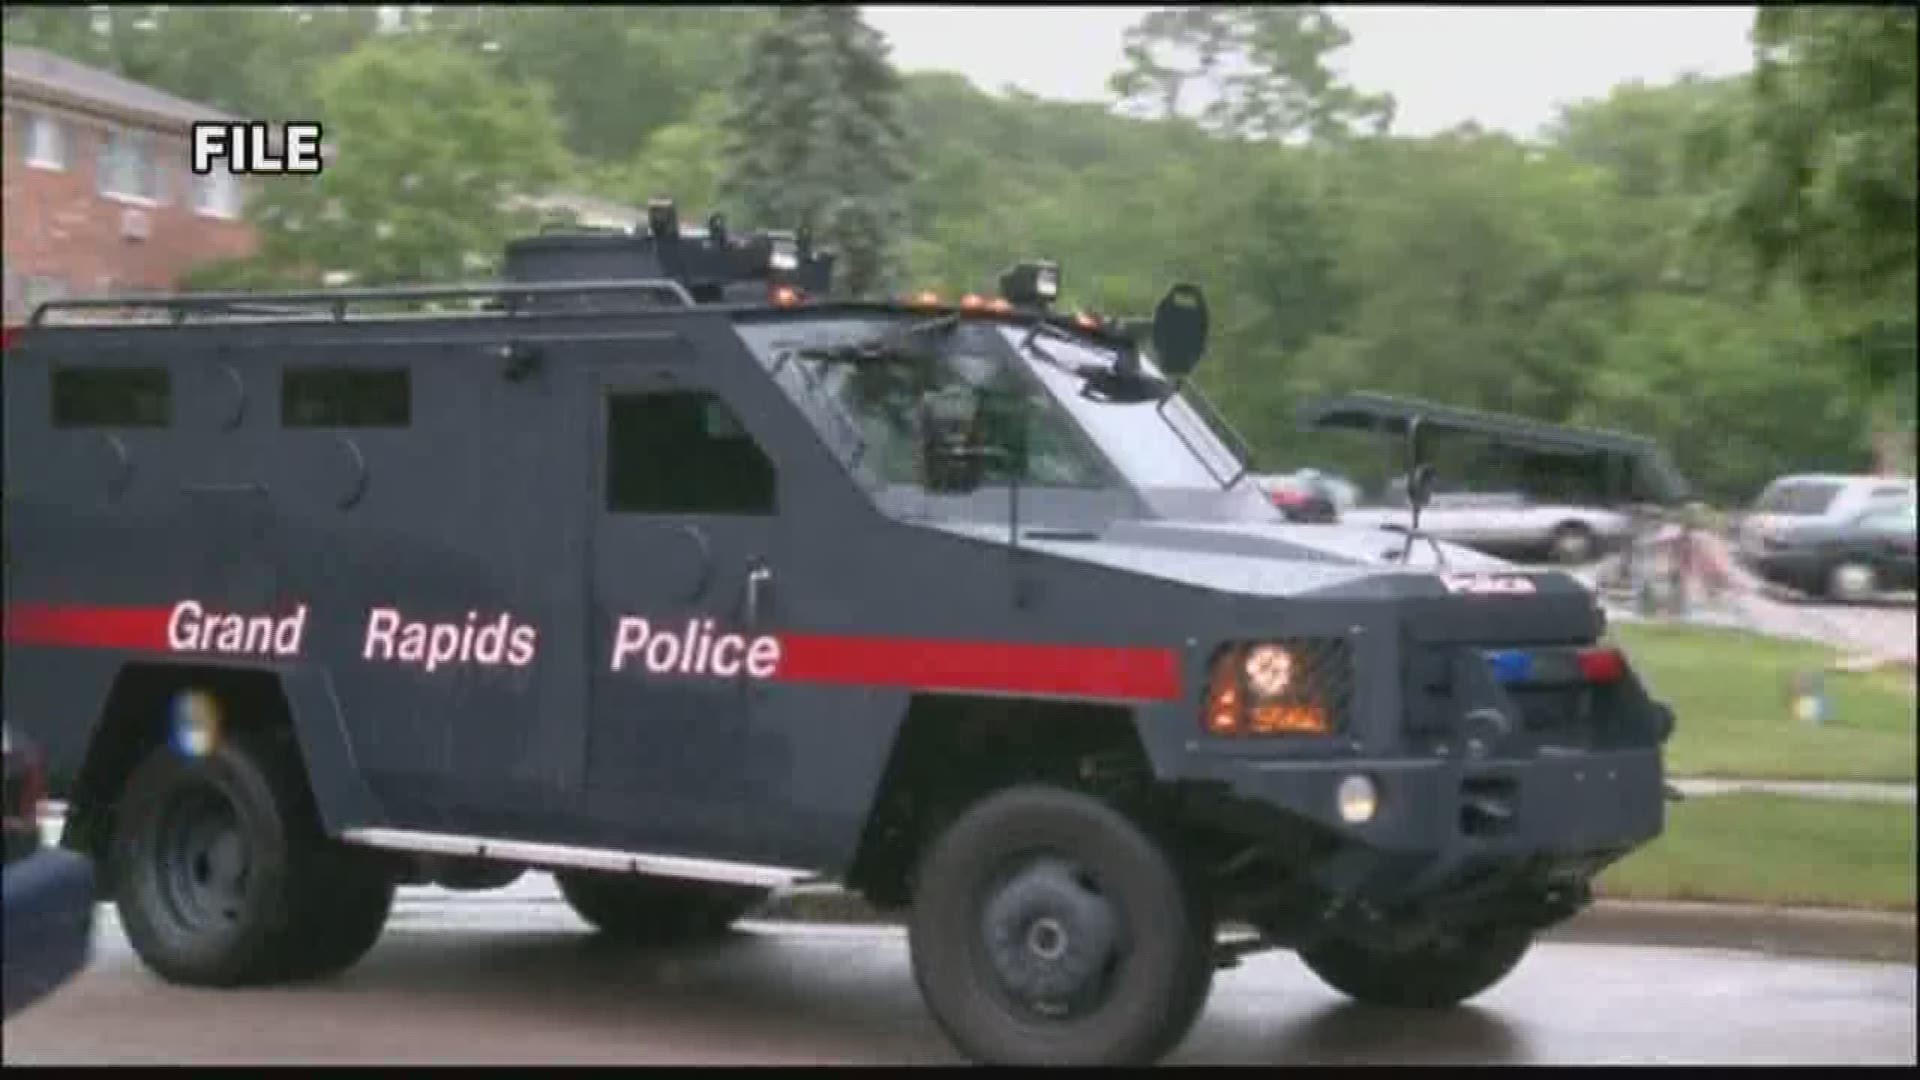 Study shows minorities are stopped more by police in Grand Rapids